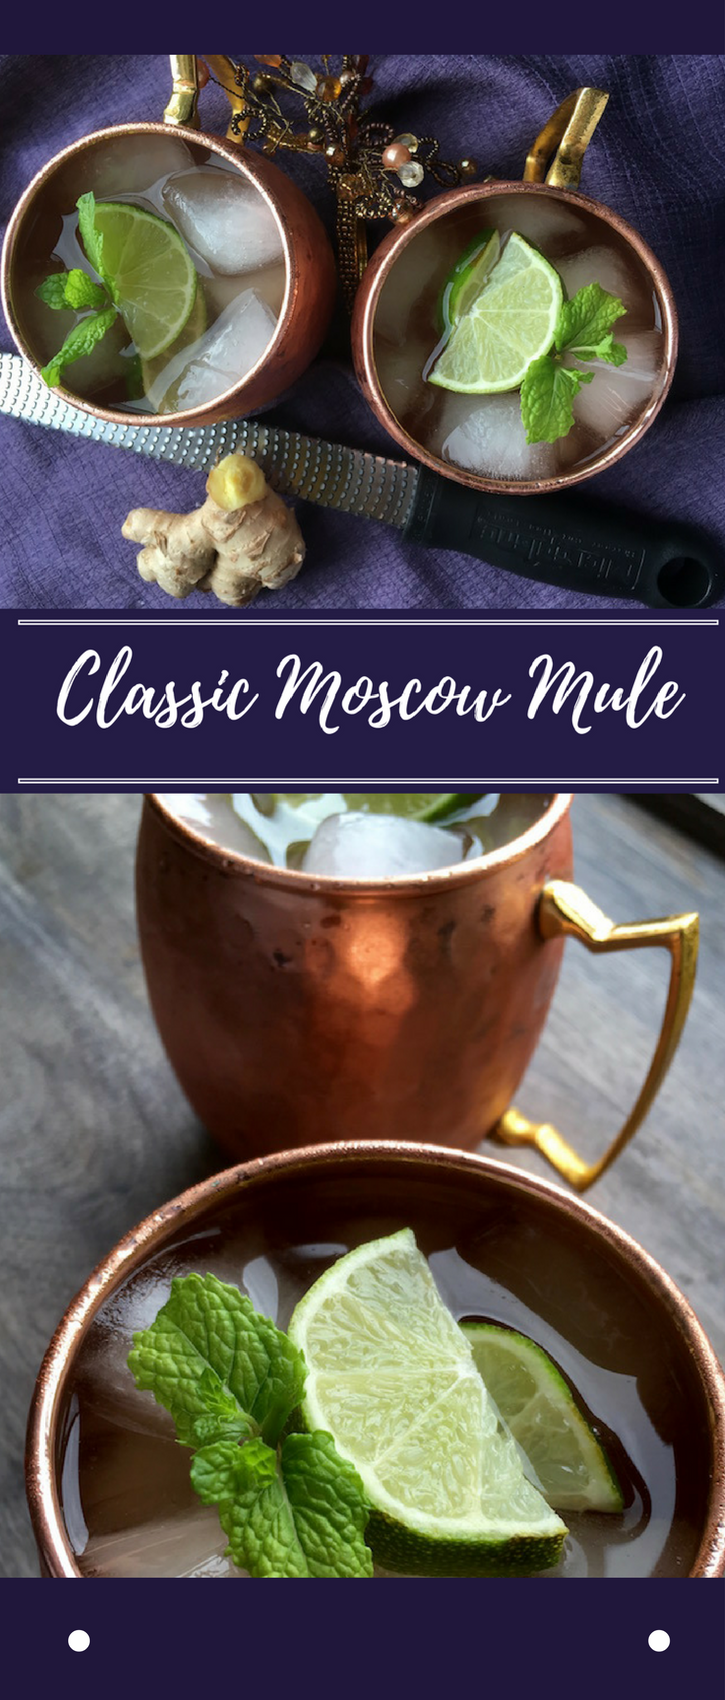 Classic Moscow Mule with Fresh Ginger Syrup